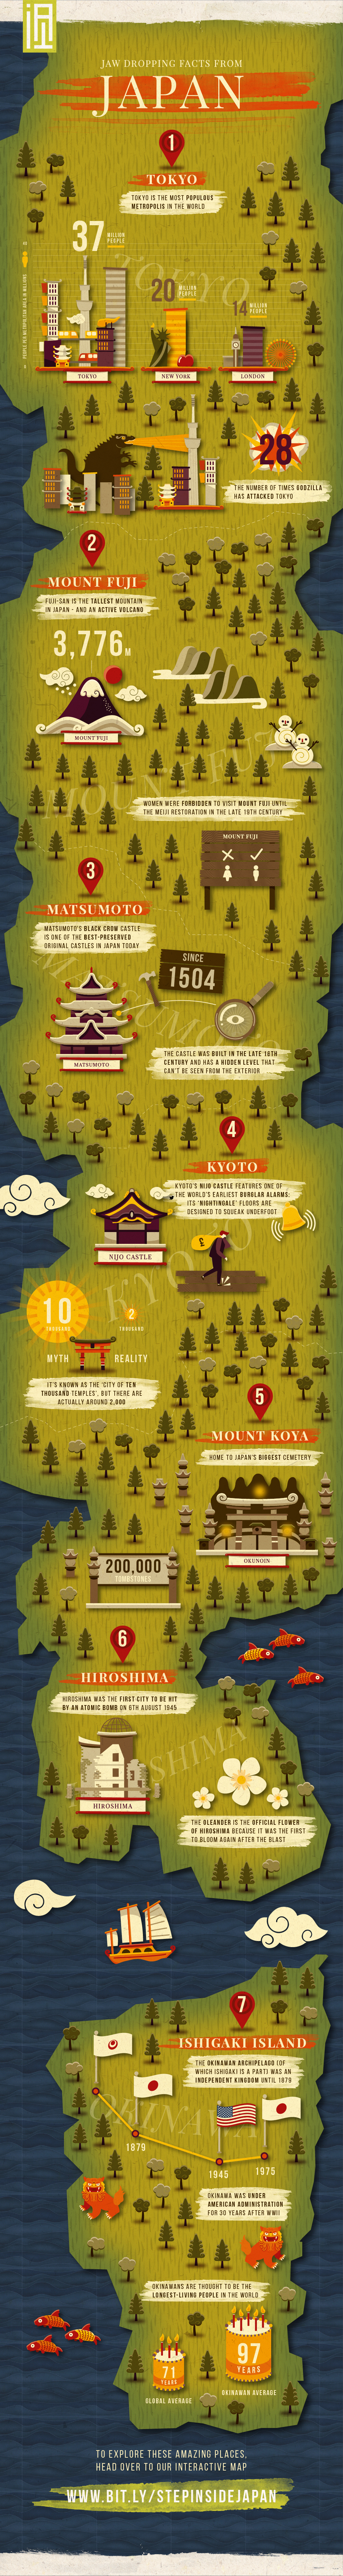 Jaw-Dropping Facts About Japan